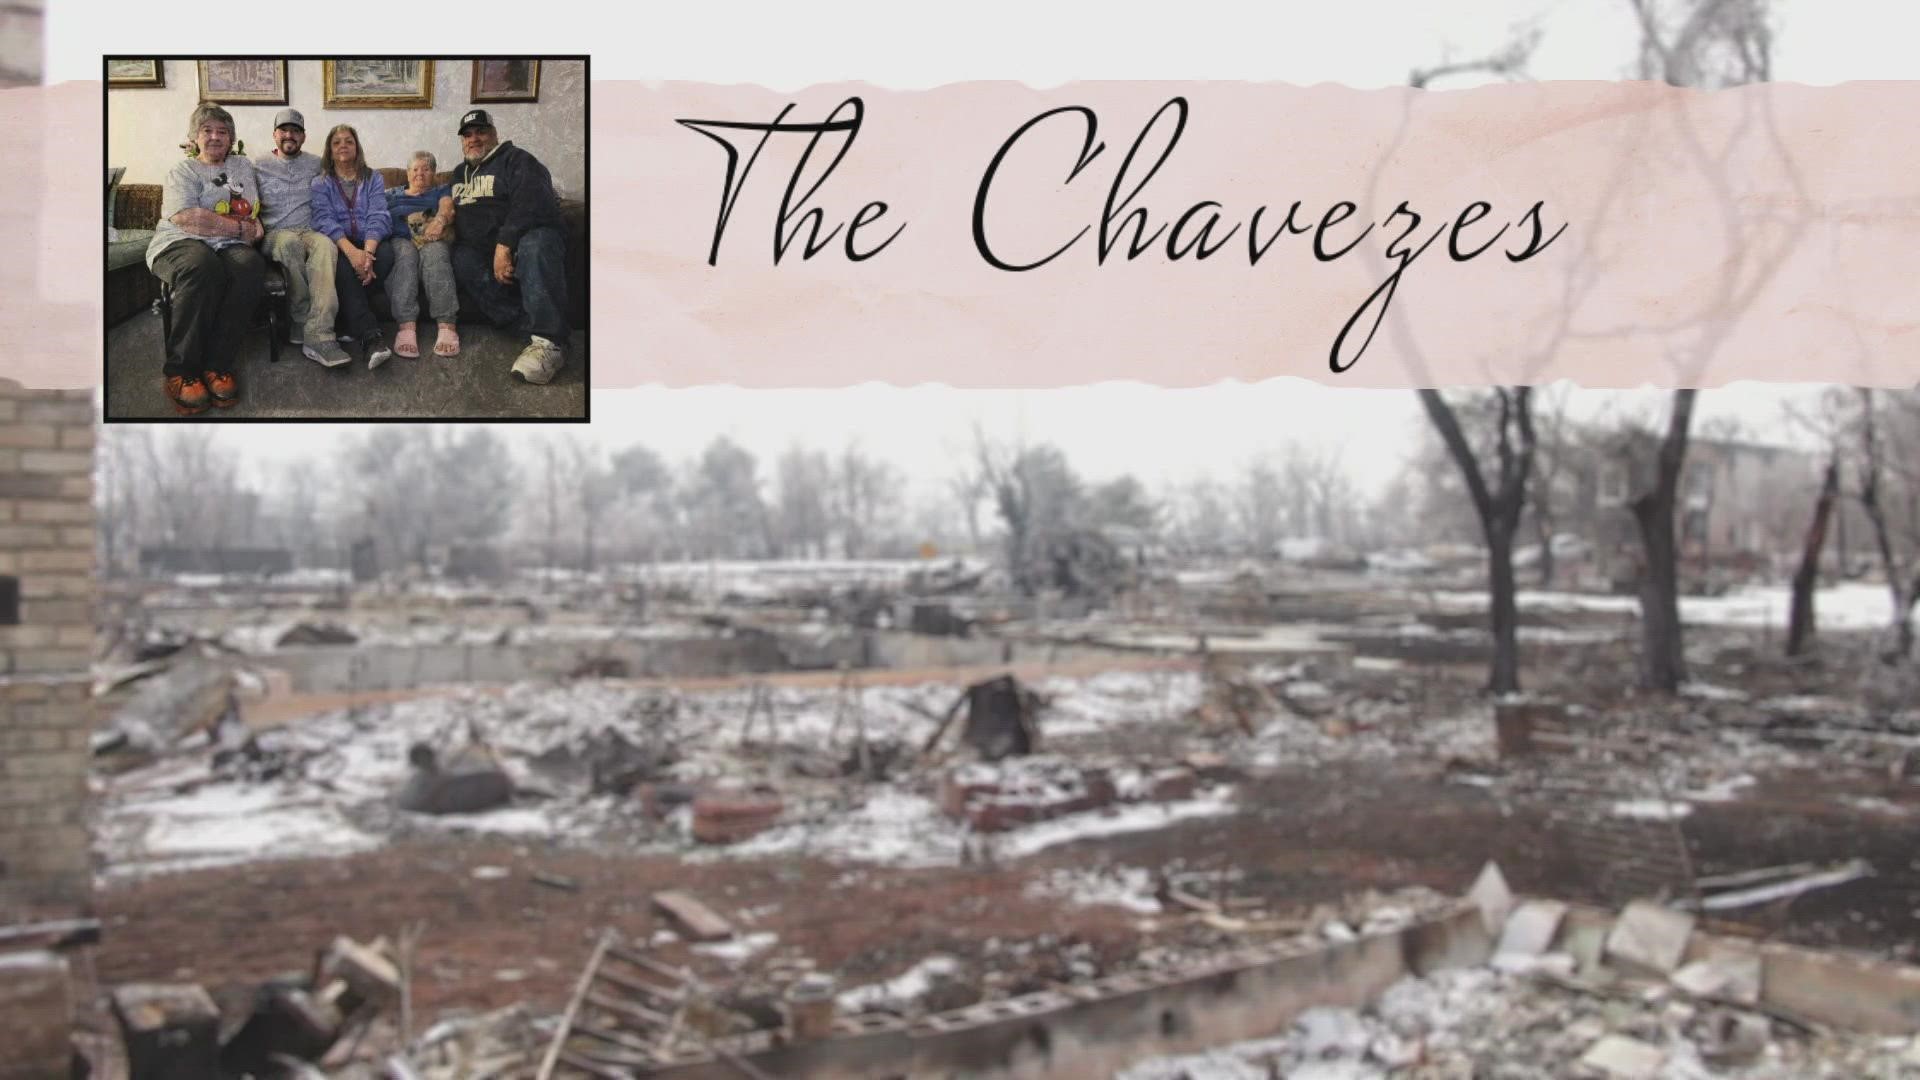 The Chavez family is waiting on the first of the modular homes to arrive in the next couple of months.